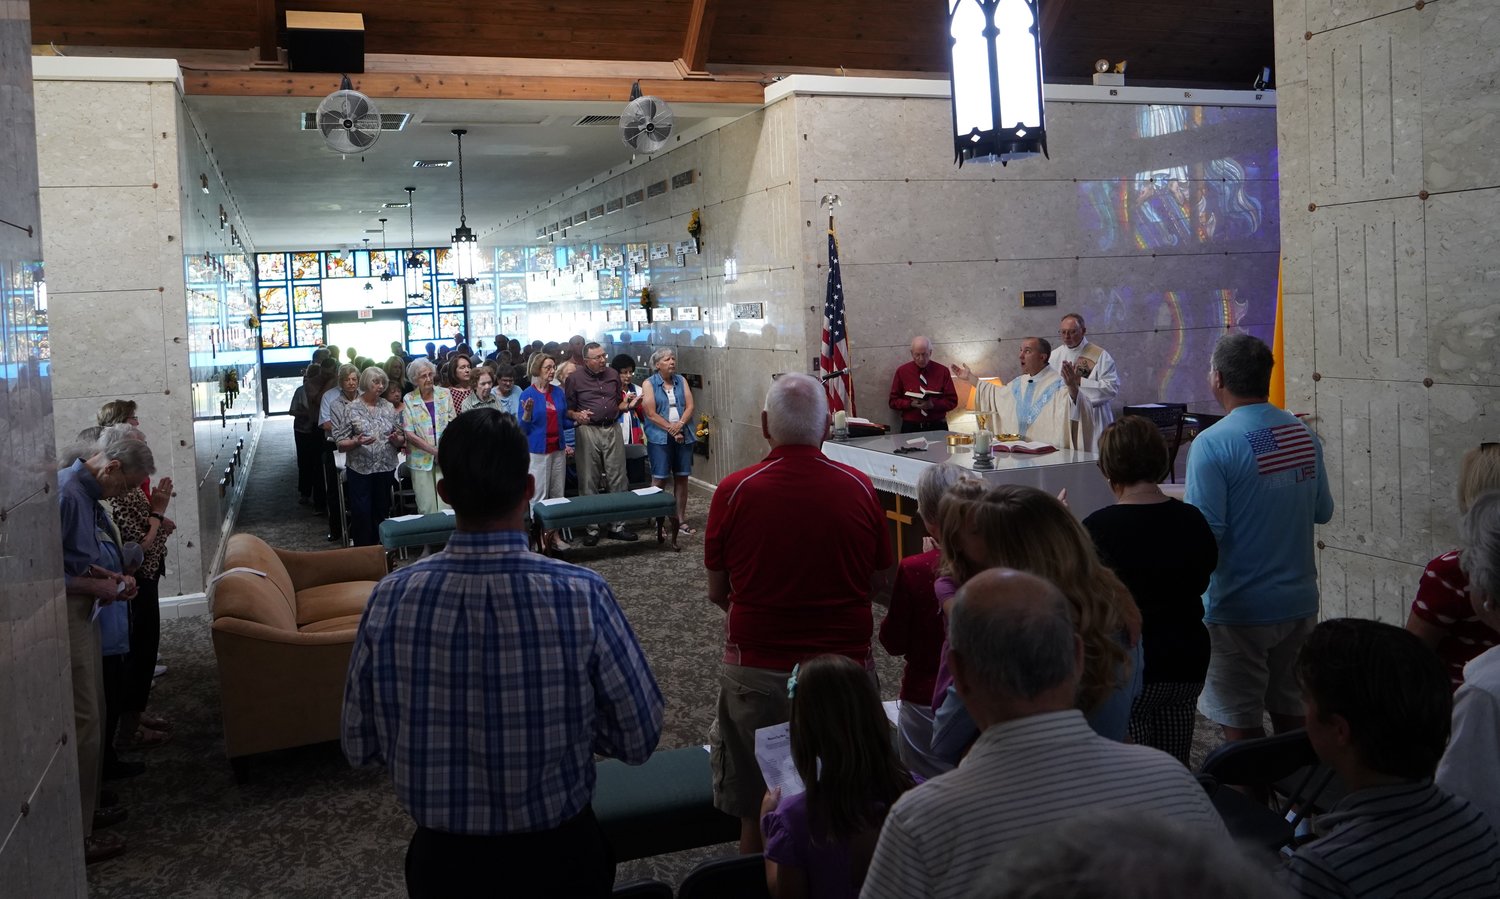 Father Louis Nelen, pastor of Cathedral of St. Joseph Parish in Jefferson City, offers Mass in the Mausoleum Chapel of Resurrection Cemetery in Jefferson City on Memorial Day, 2022.